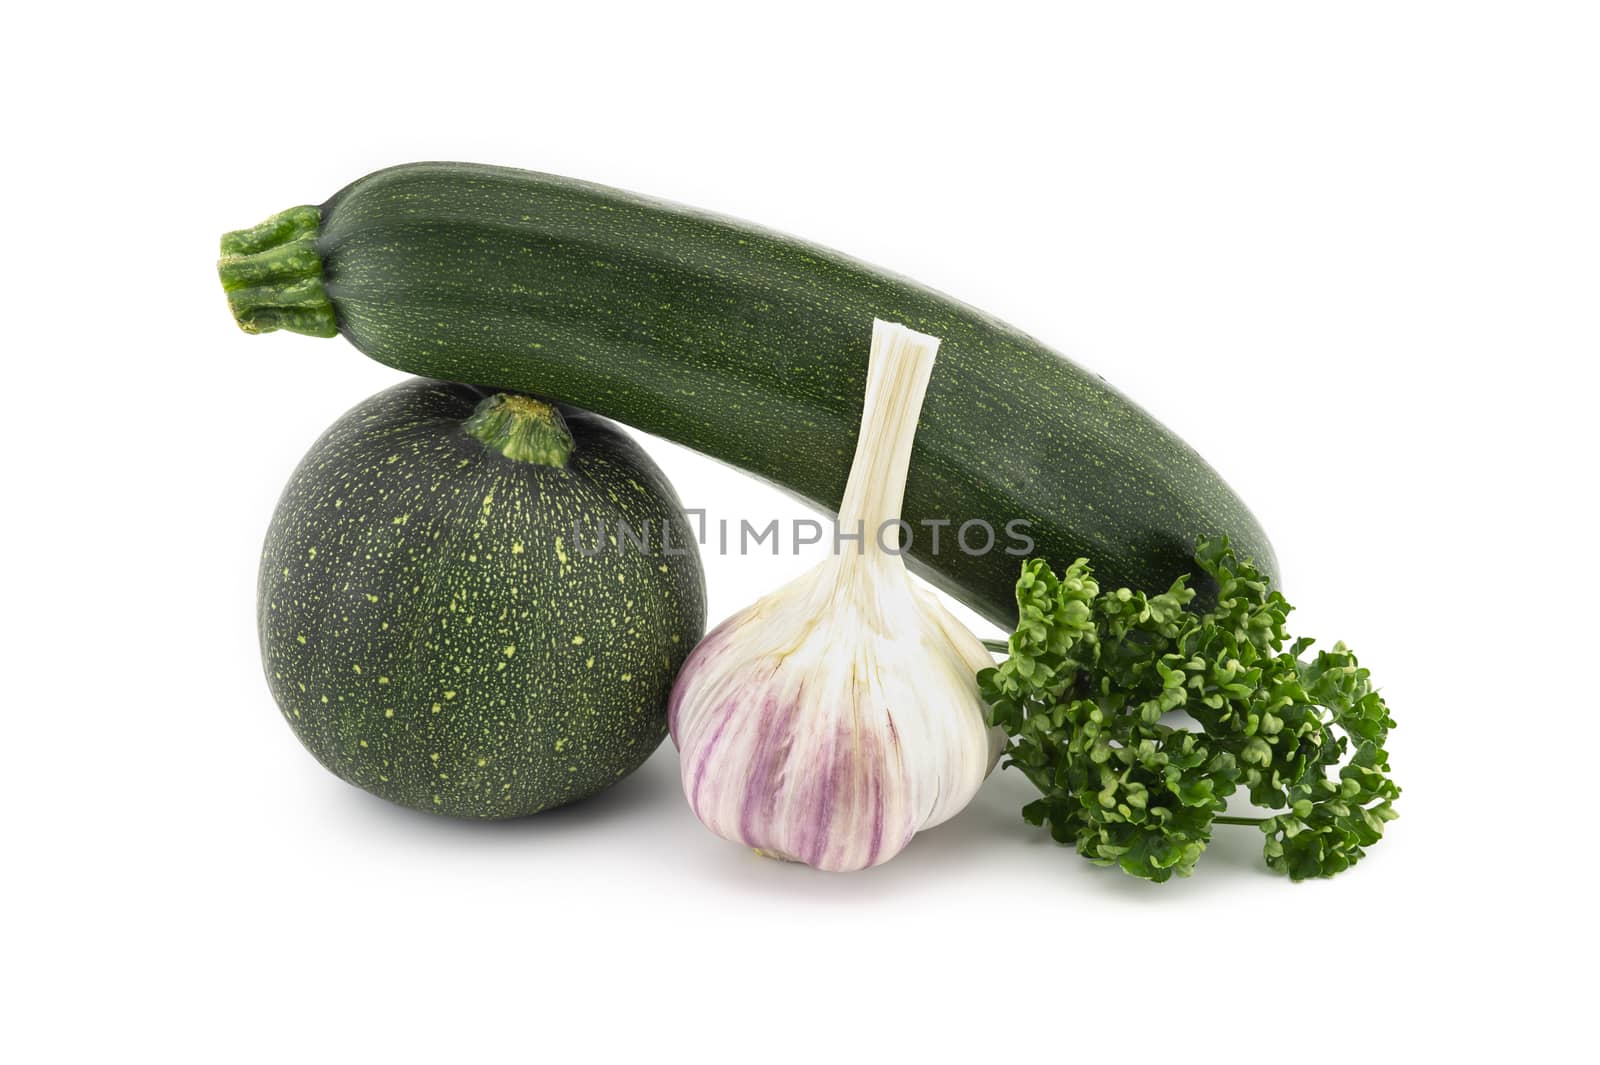 Green round and traditional courgette or zucchini, garlic knob and fresh parsley sprigs isolated on white background